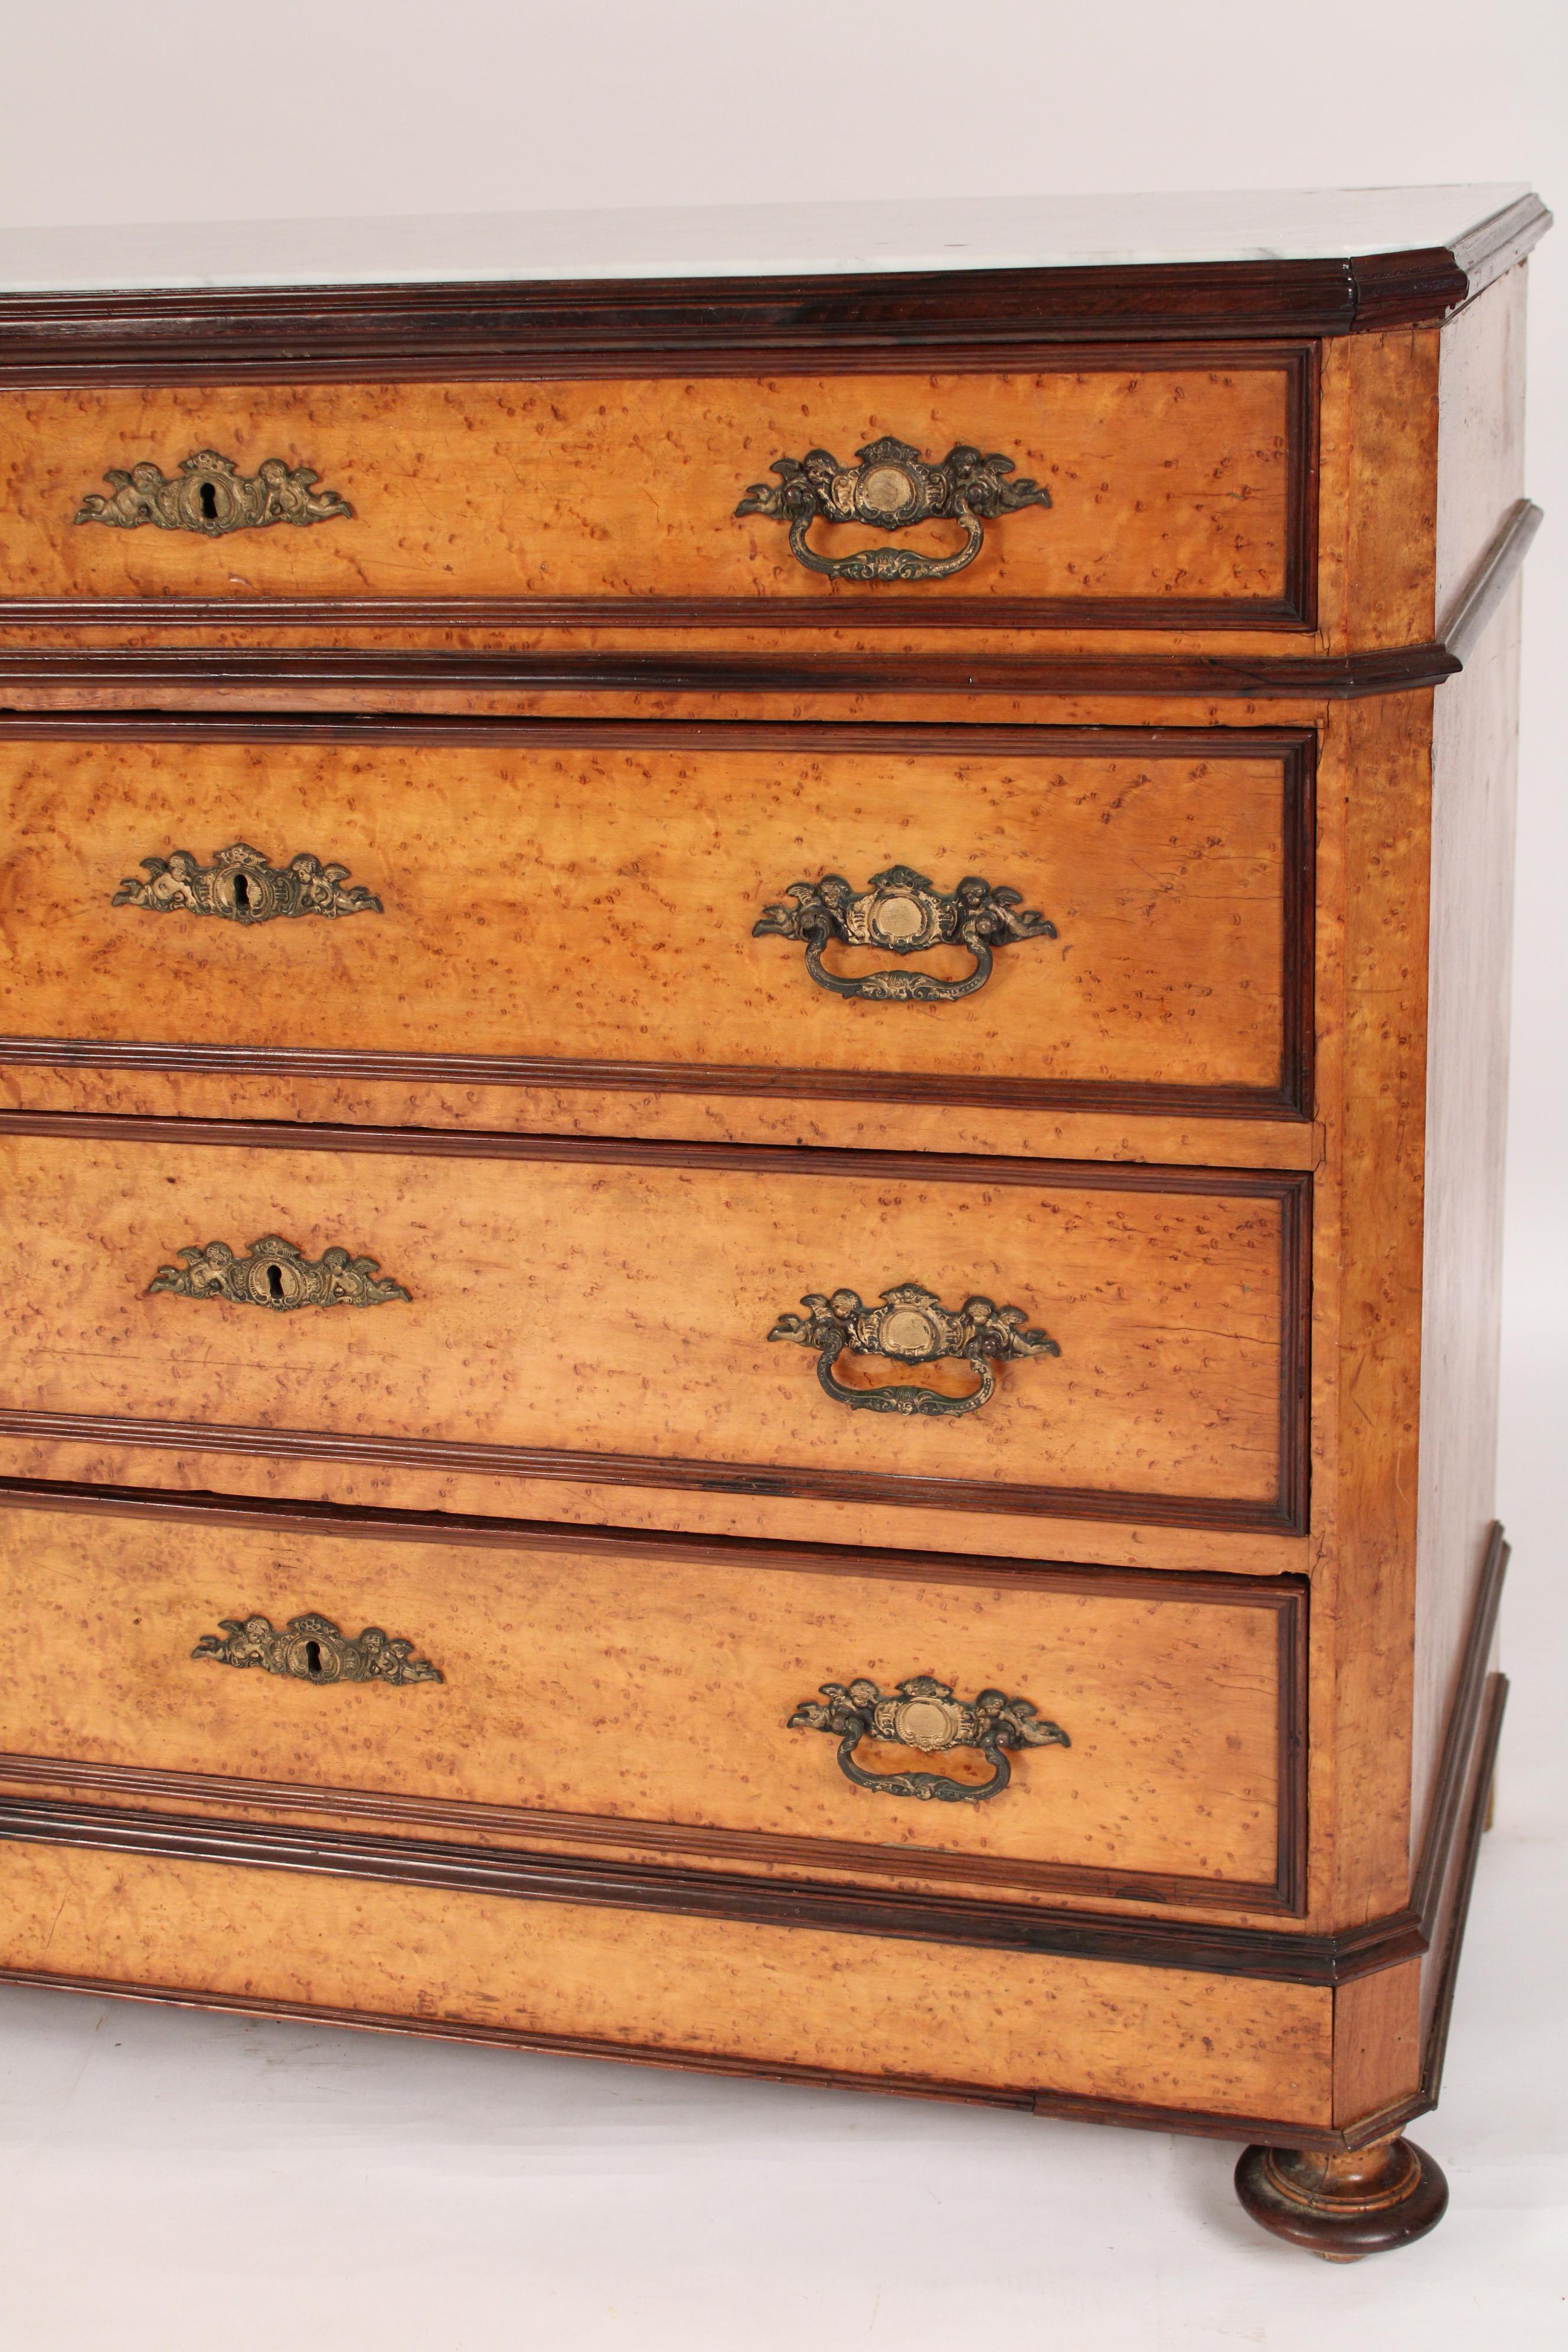 Napoleon III Birdseye Maple Chest of Drawers In Good Condition For Sale In Laguna Beach, CA